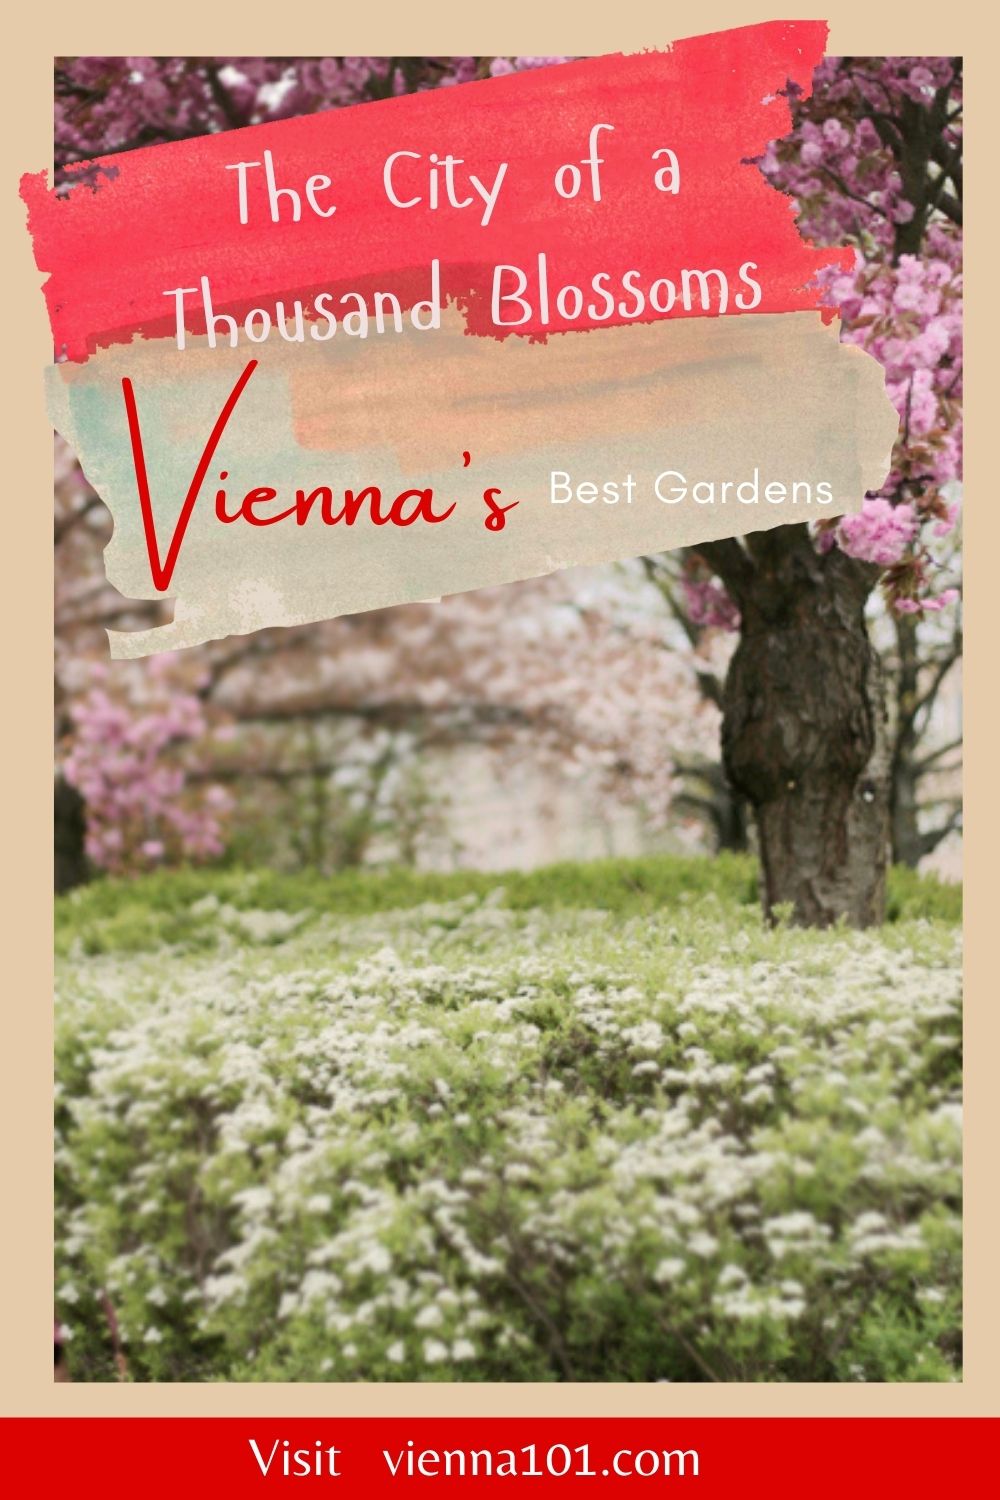 Vienna's floral display may pale in comparison to other bigger cities. Here are some of the spots in Vienna where the flowers are in full bloom come spring.